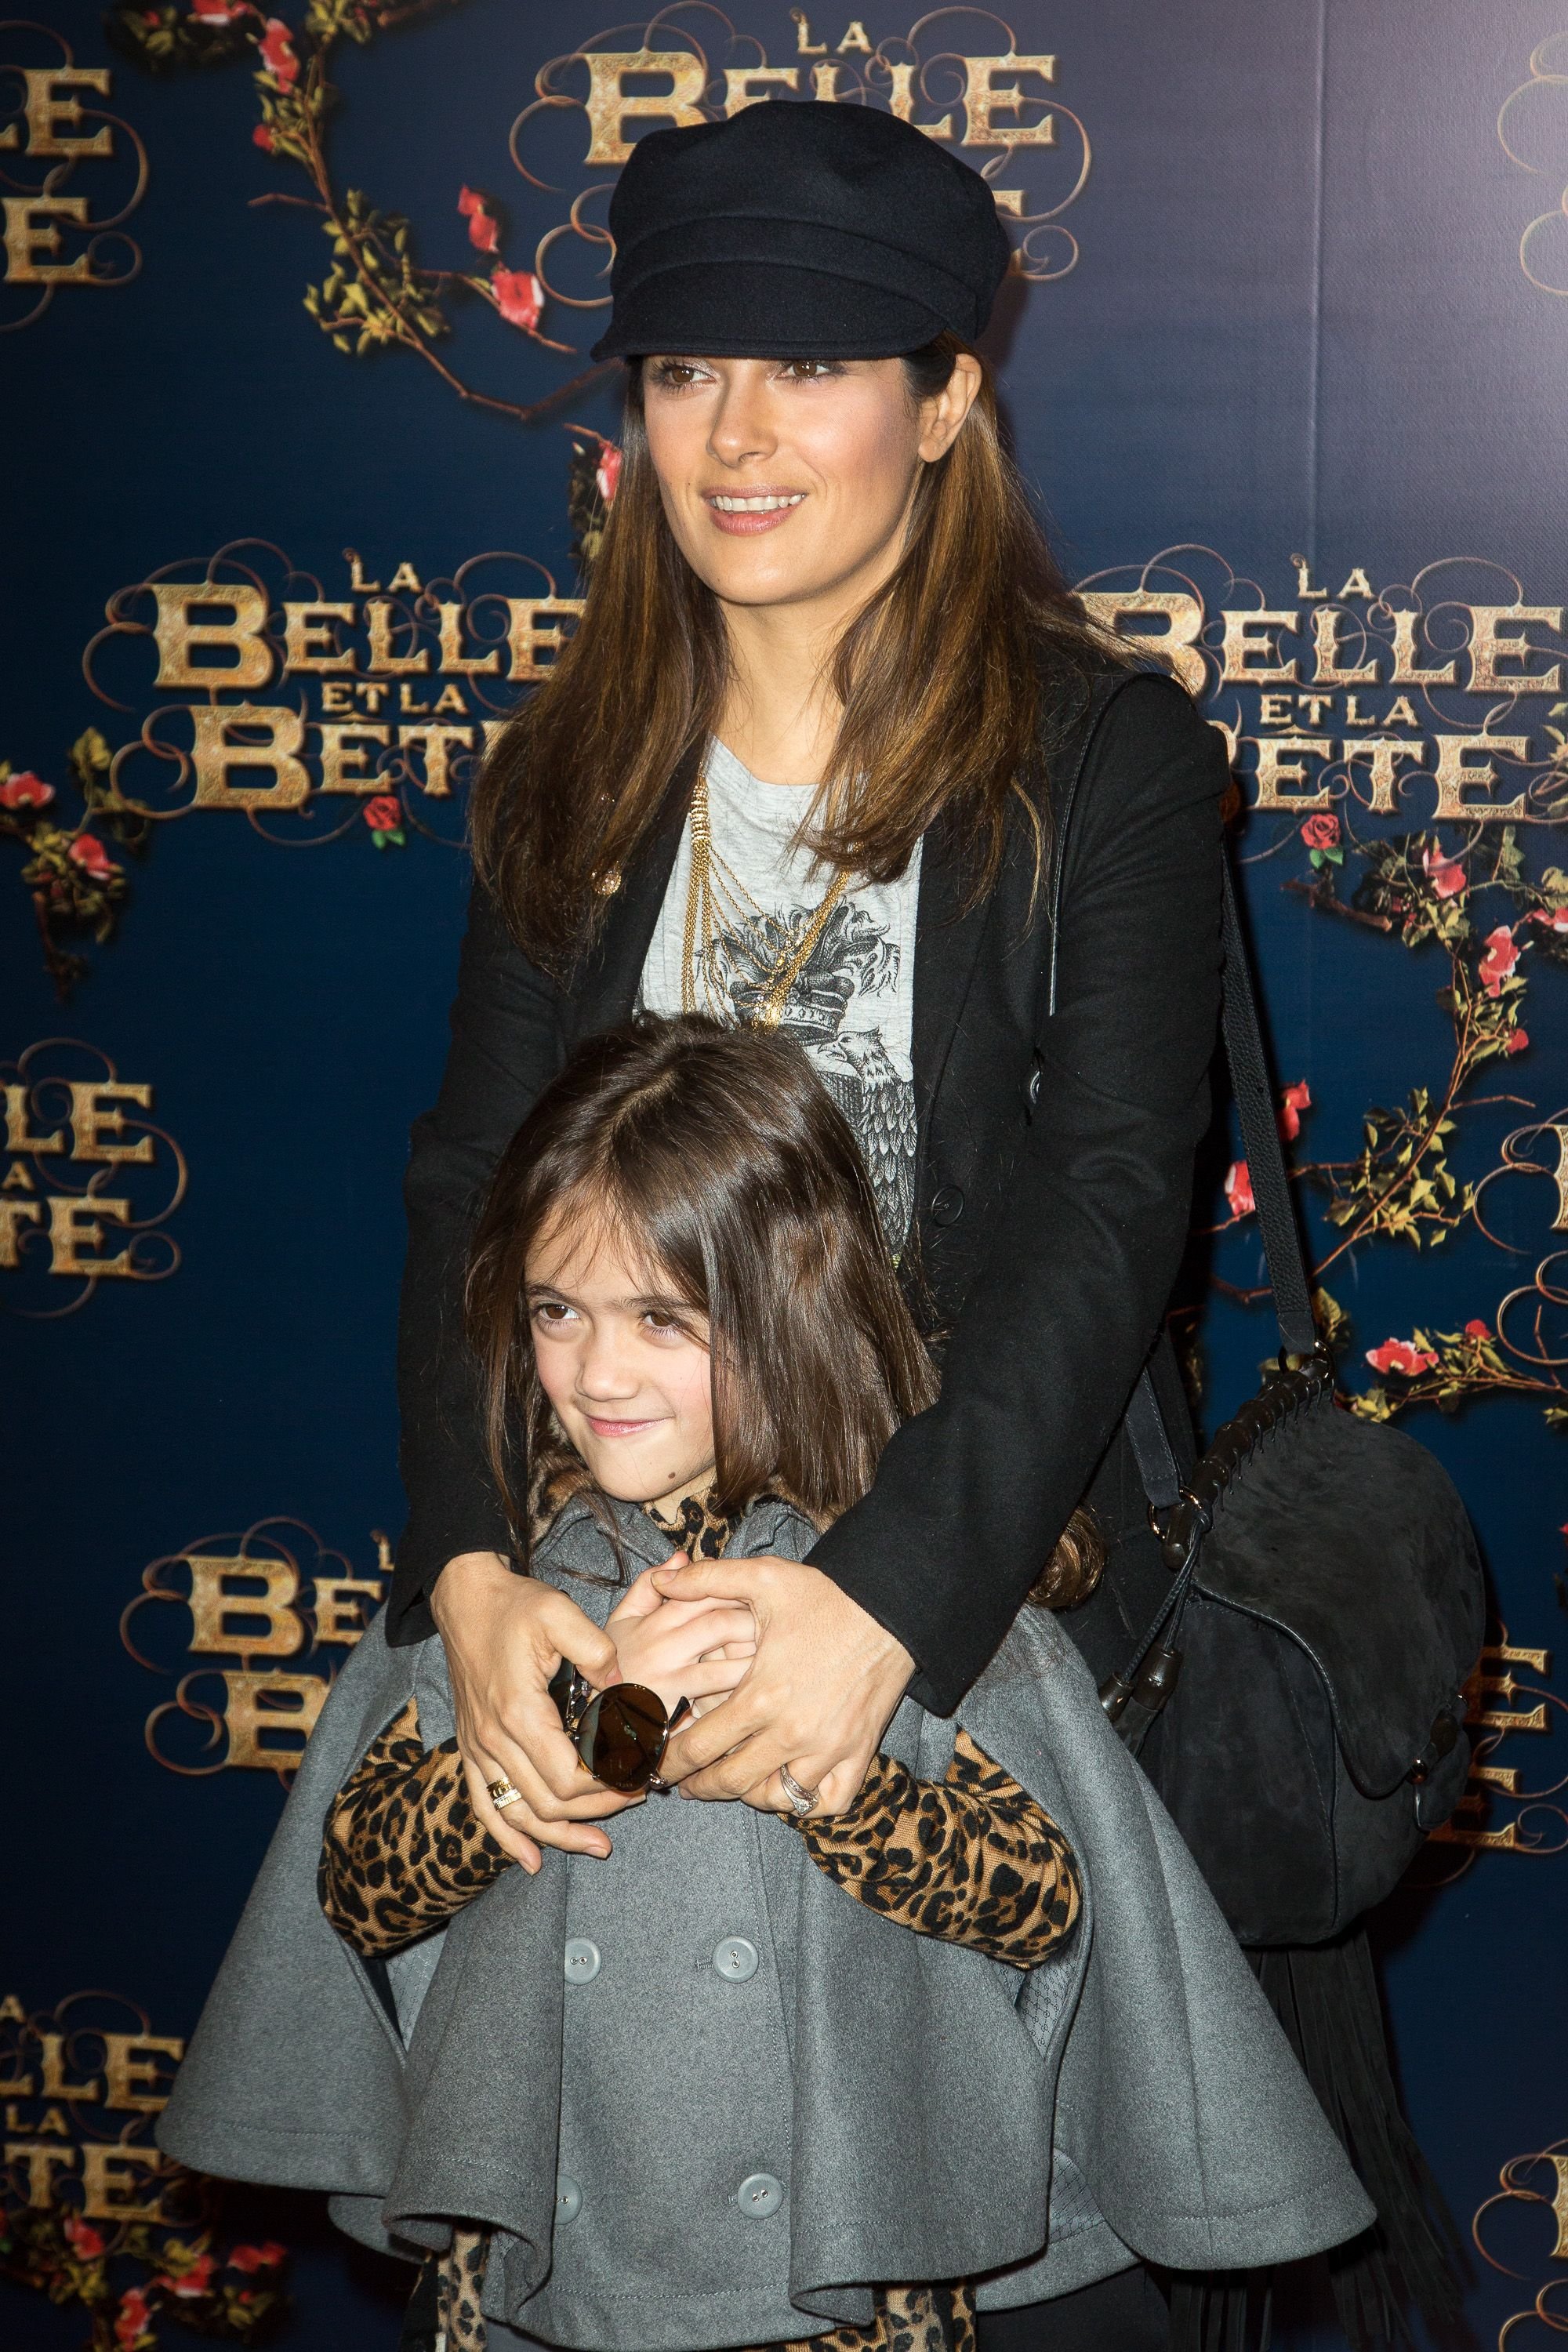  Salma Hayek and daughter Valentina Paloma Pinault at "The Beauty and the Beast" premiere in Paris, France in 2014 | Source: Getty Images